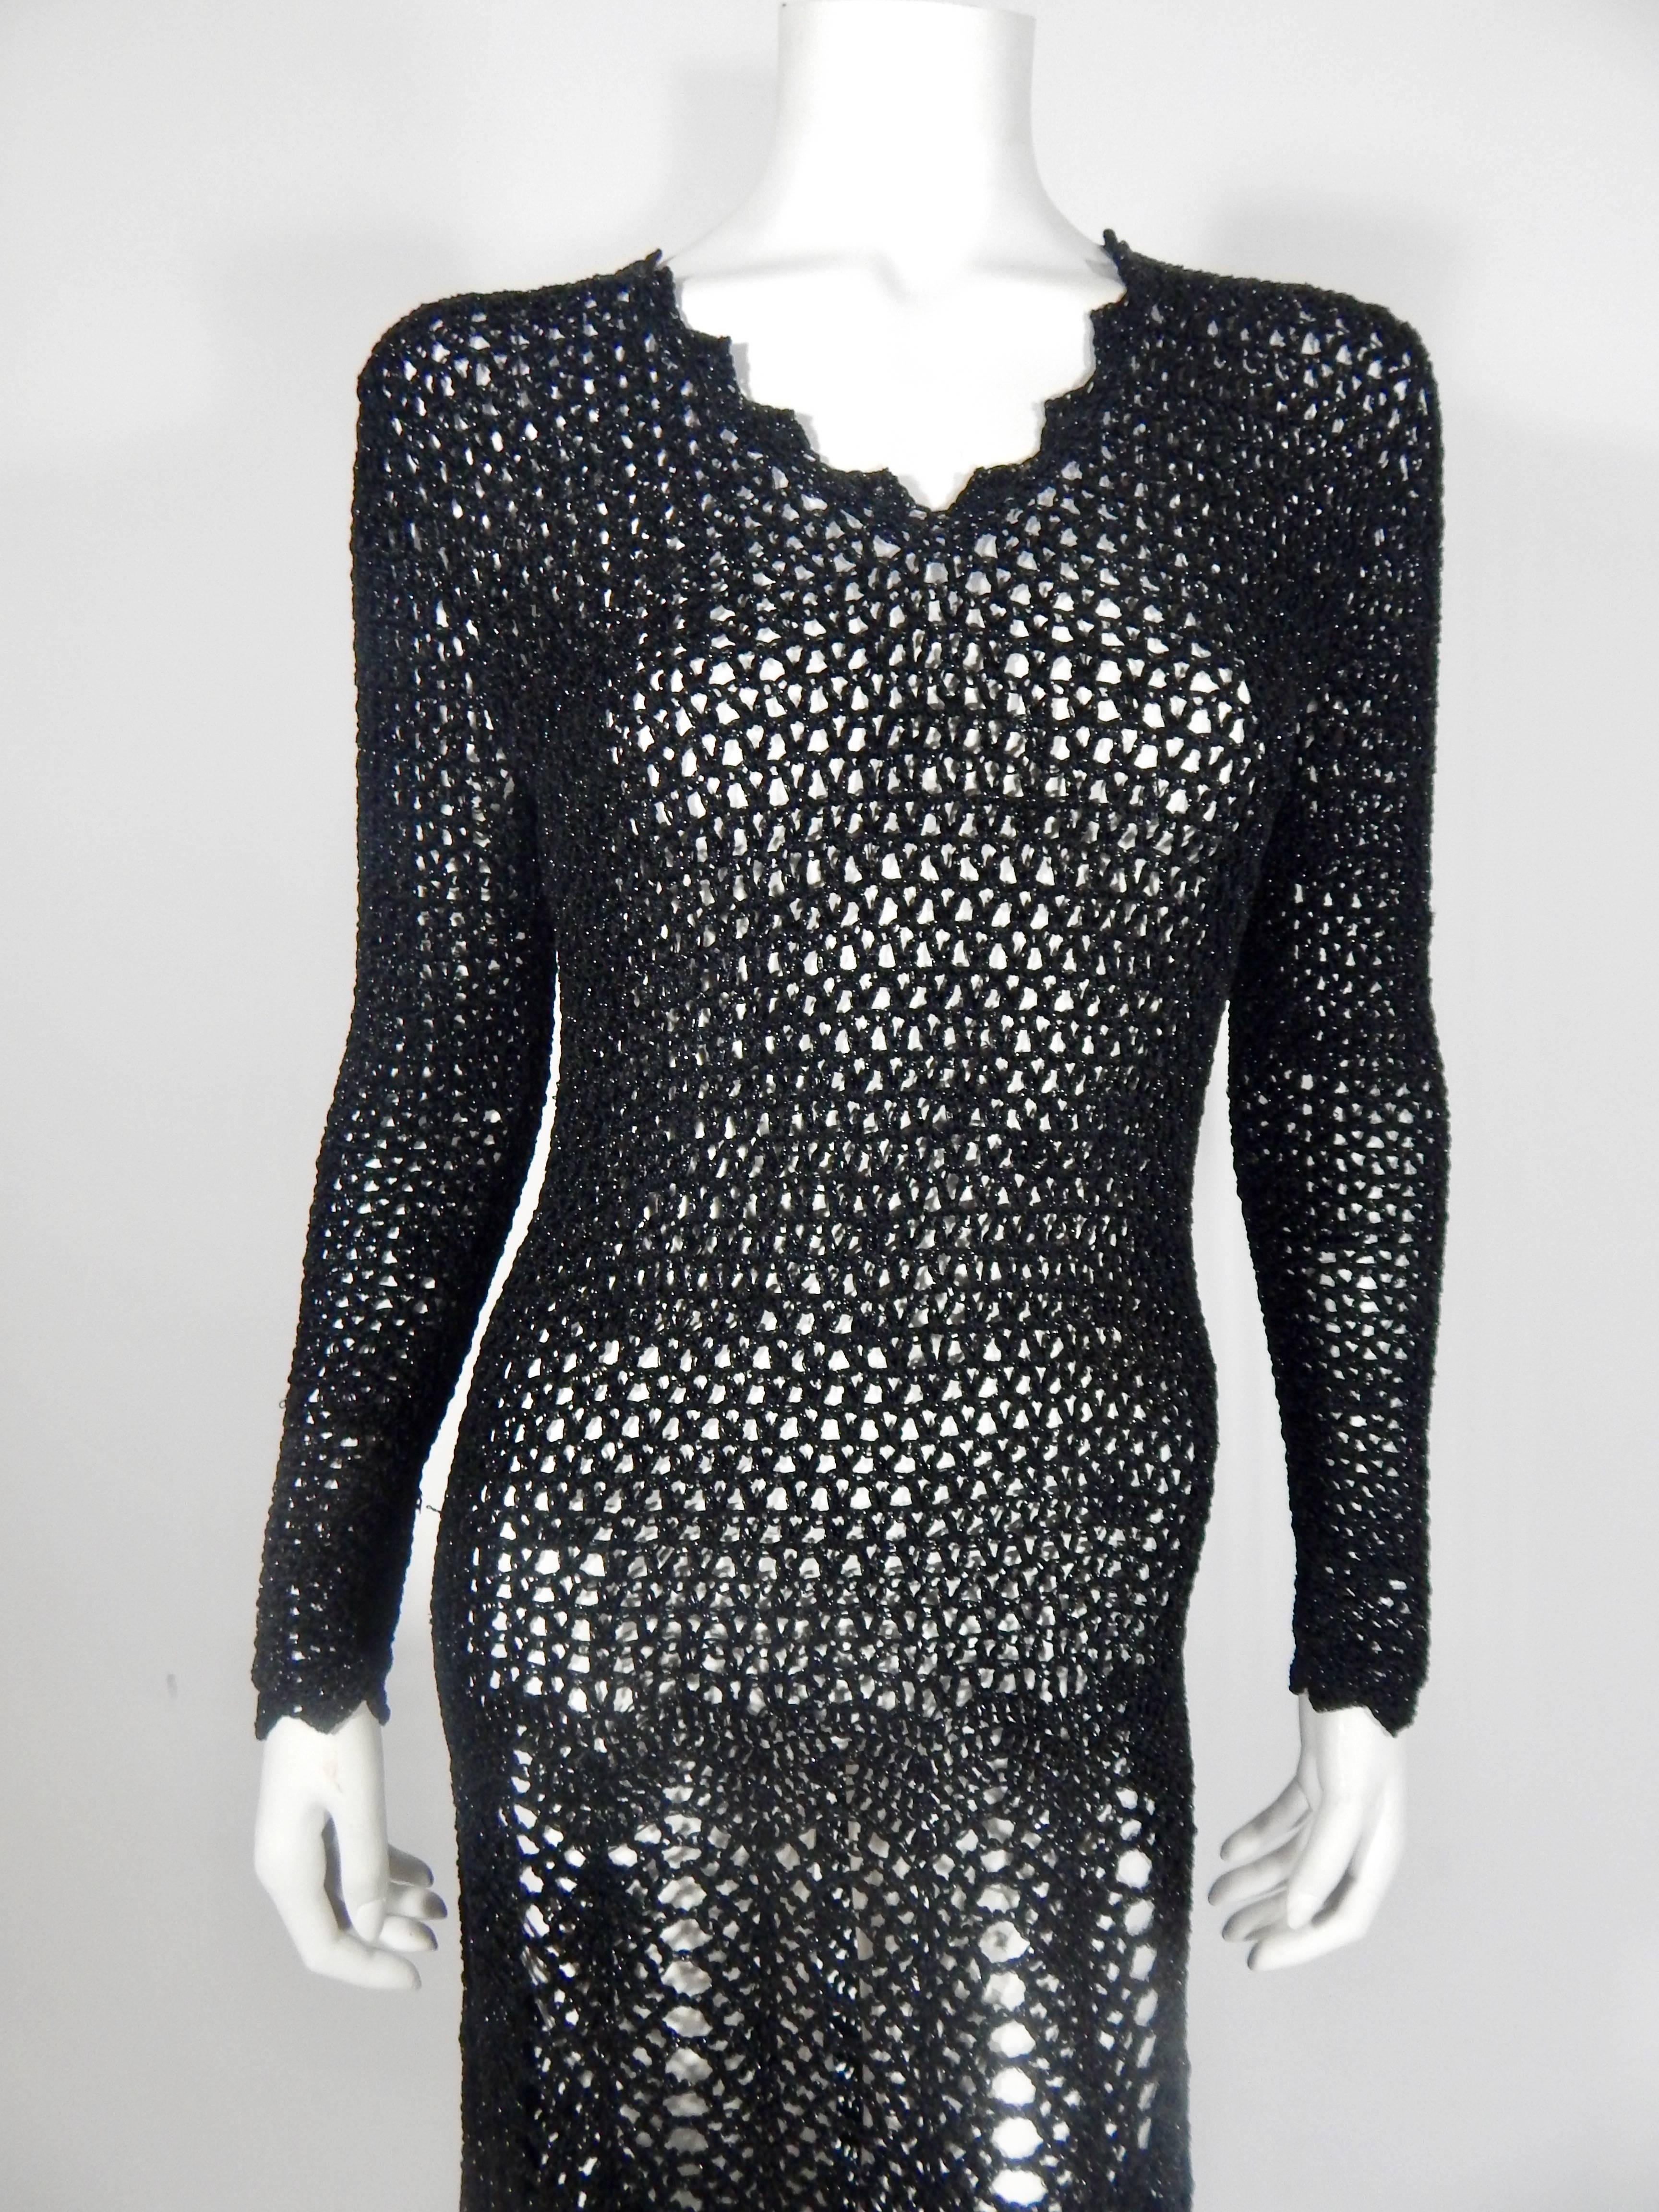 1920s Black Crochet Vintage Dress In Excellent Condition For Sale In Long Island City, NY